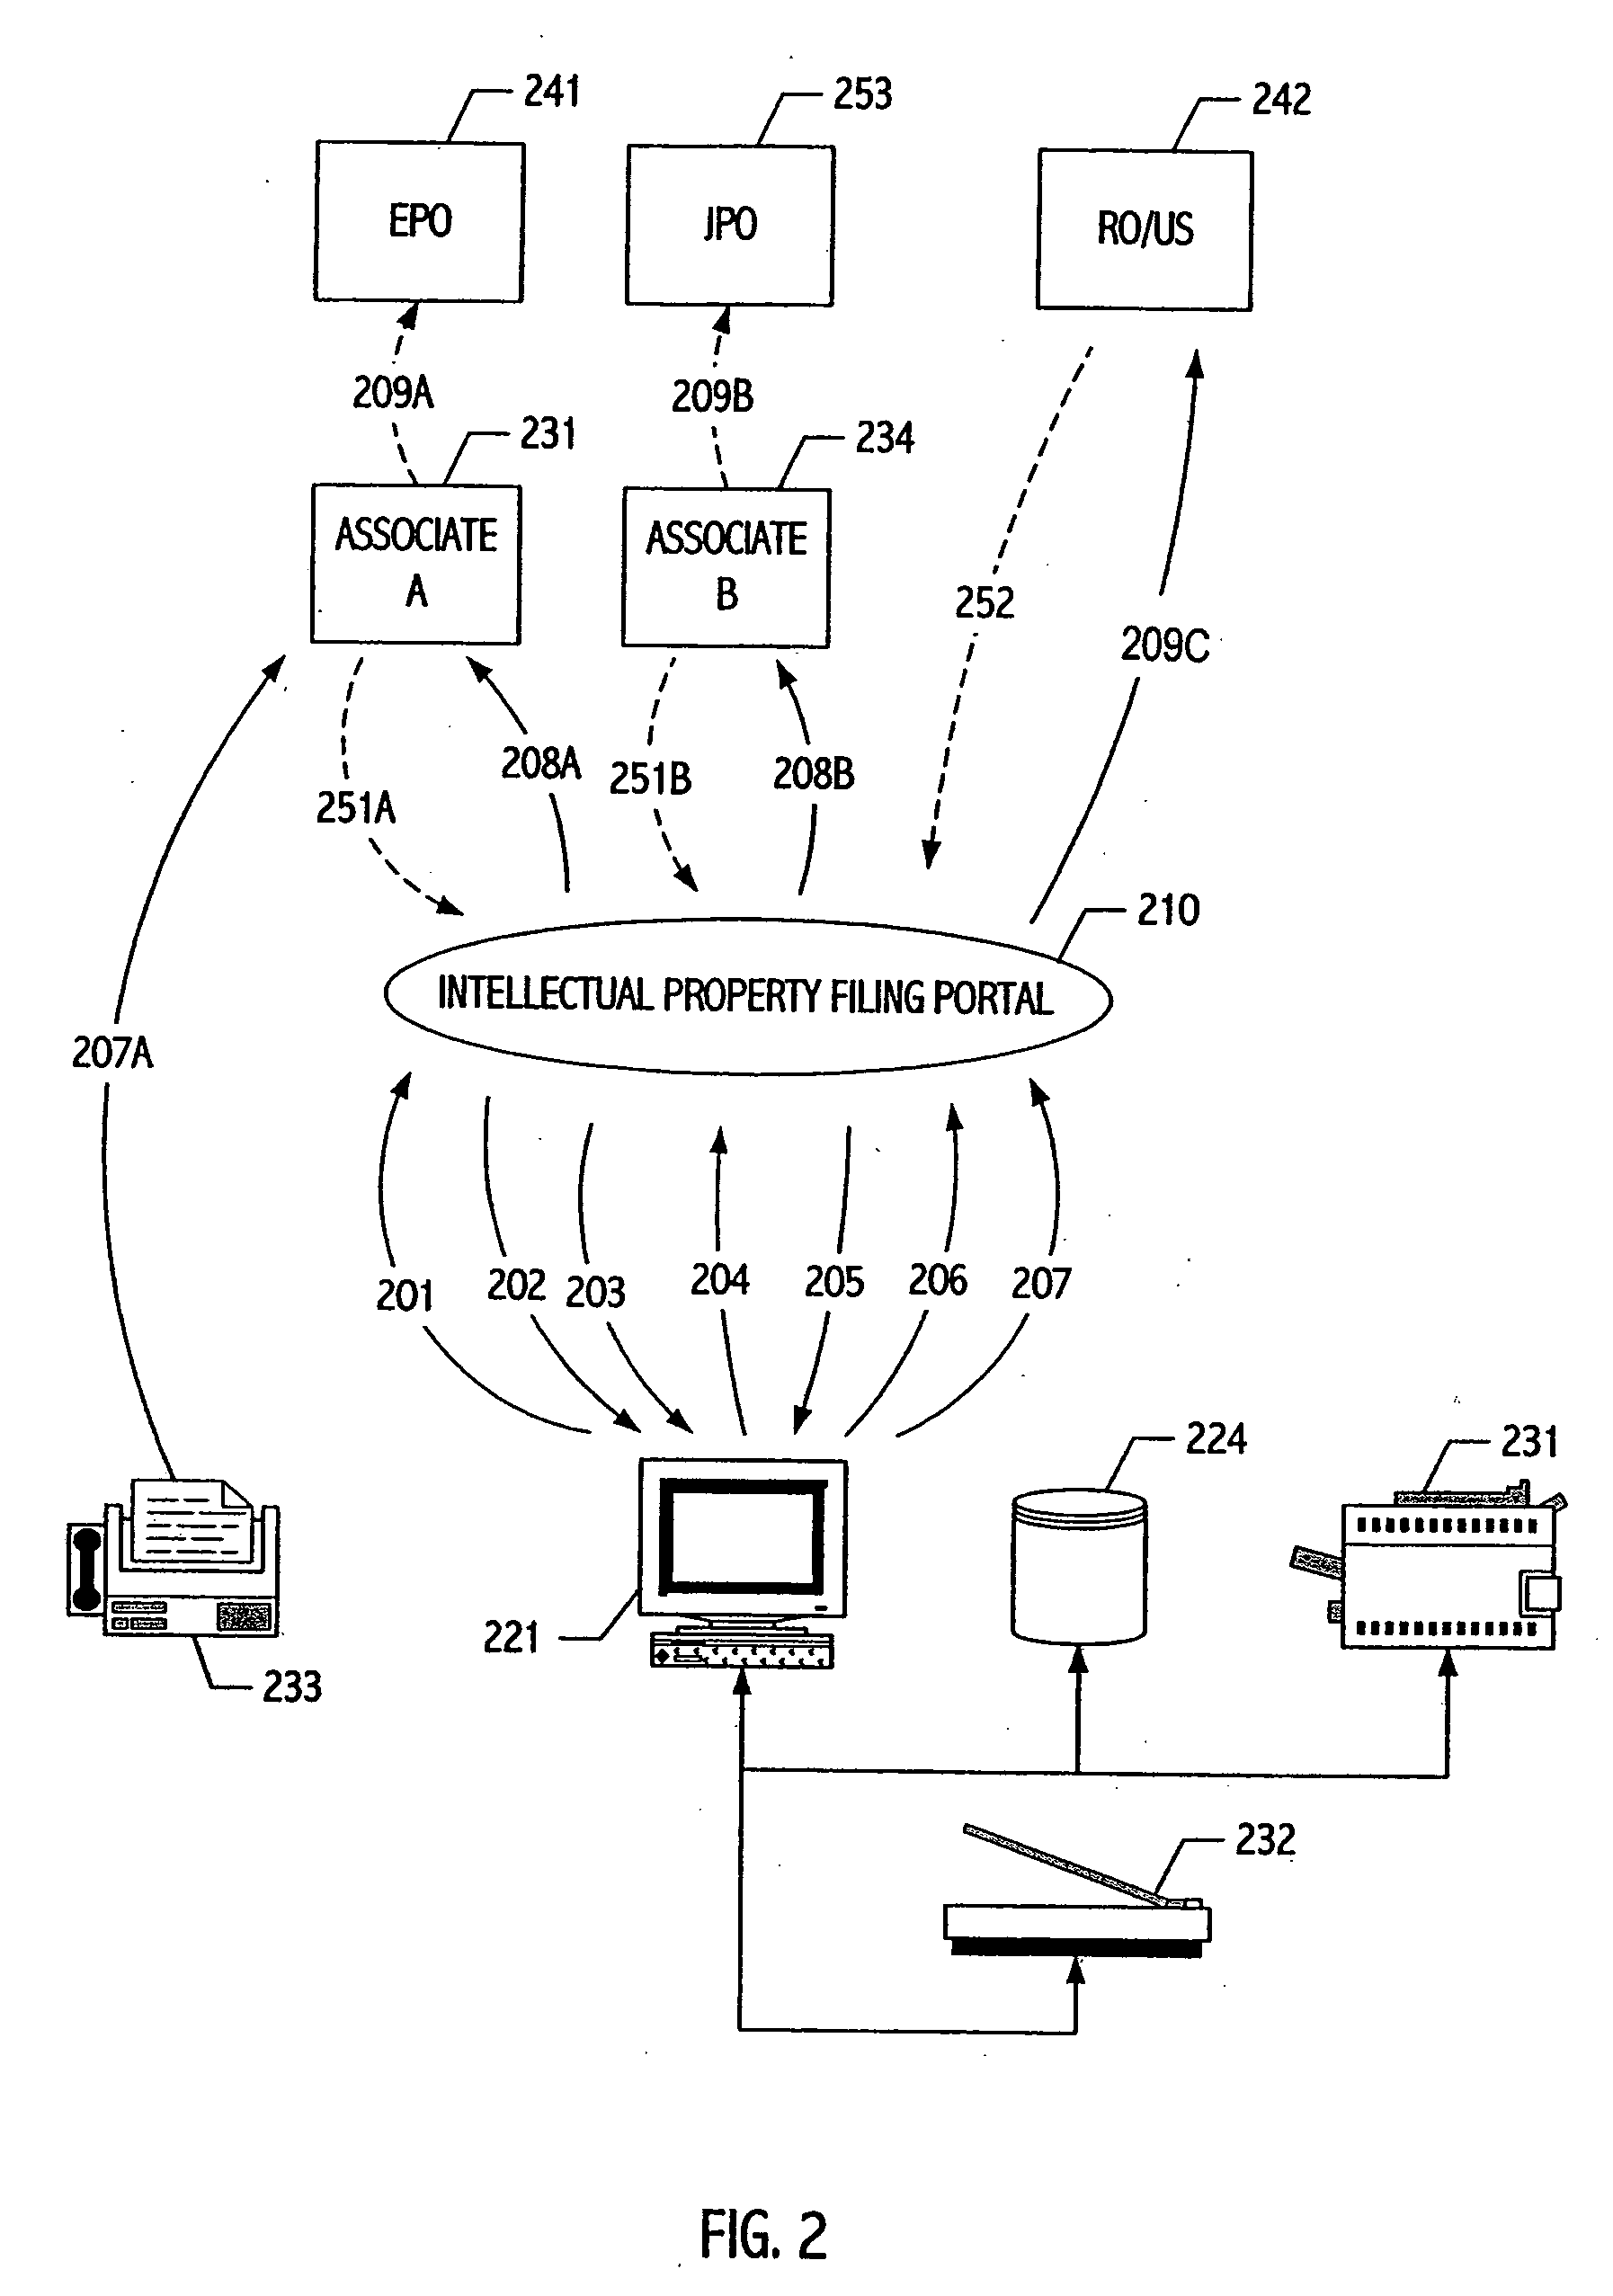 Fee transaction system and method for intellectual property acquisition and/or maintenance